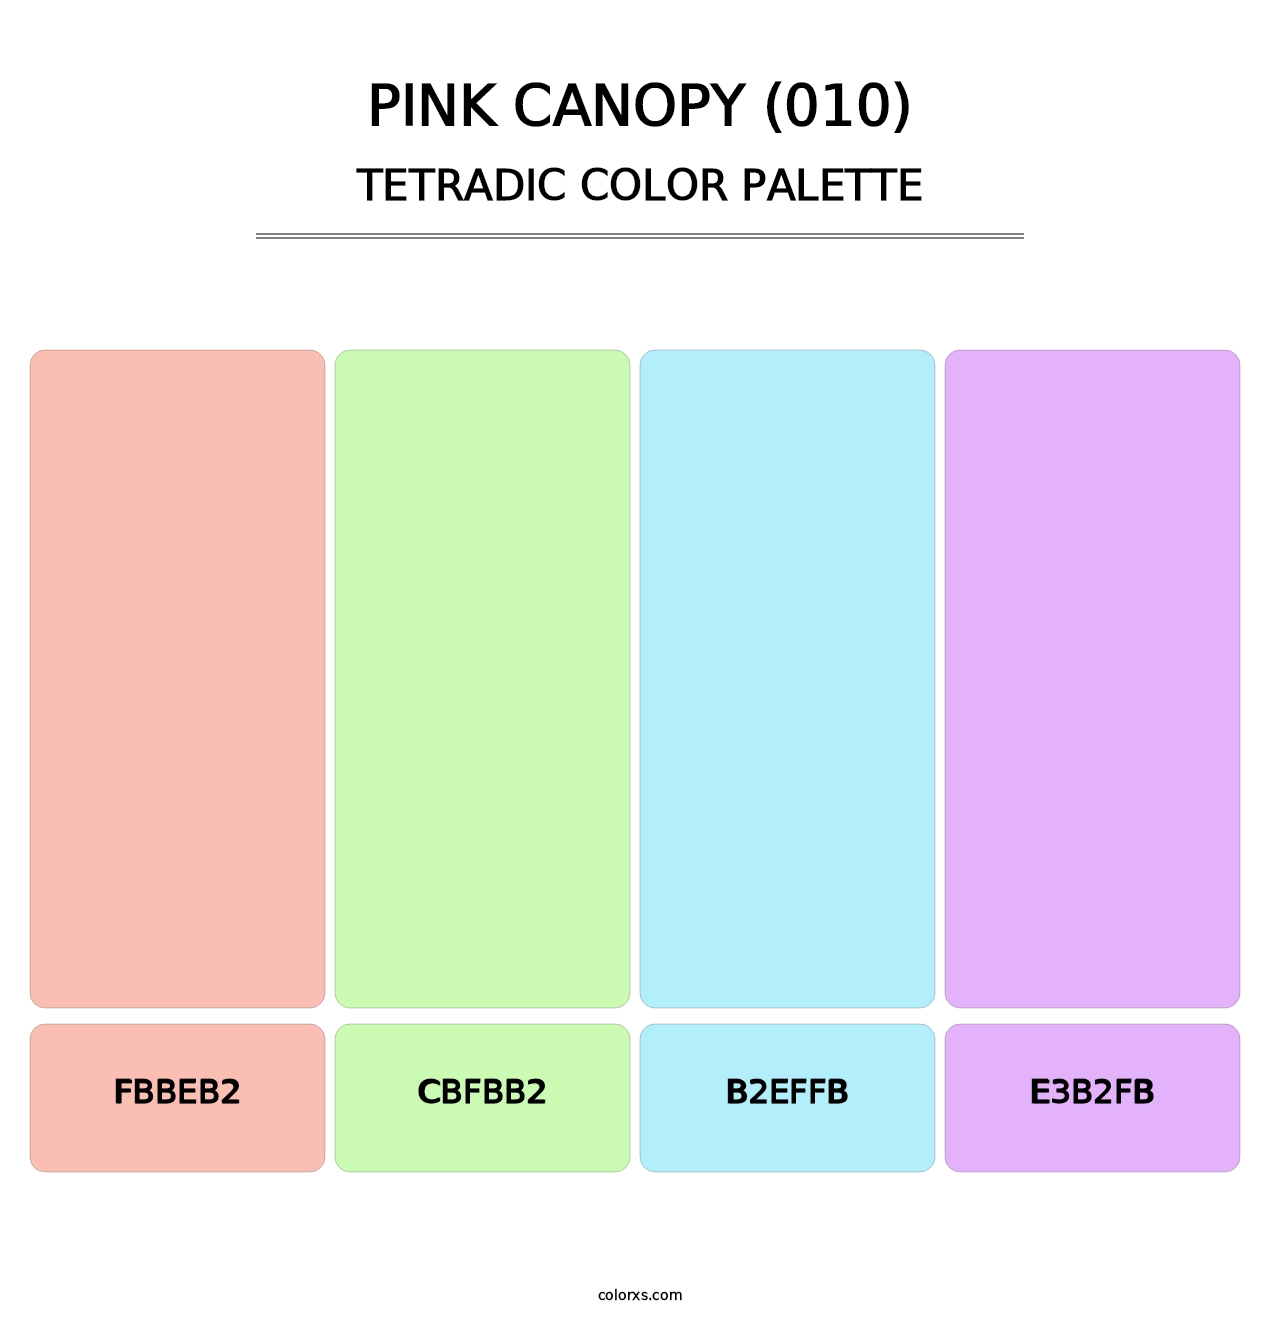 Pink Canopy (010) - Tetradic Color Palette